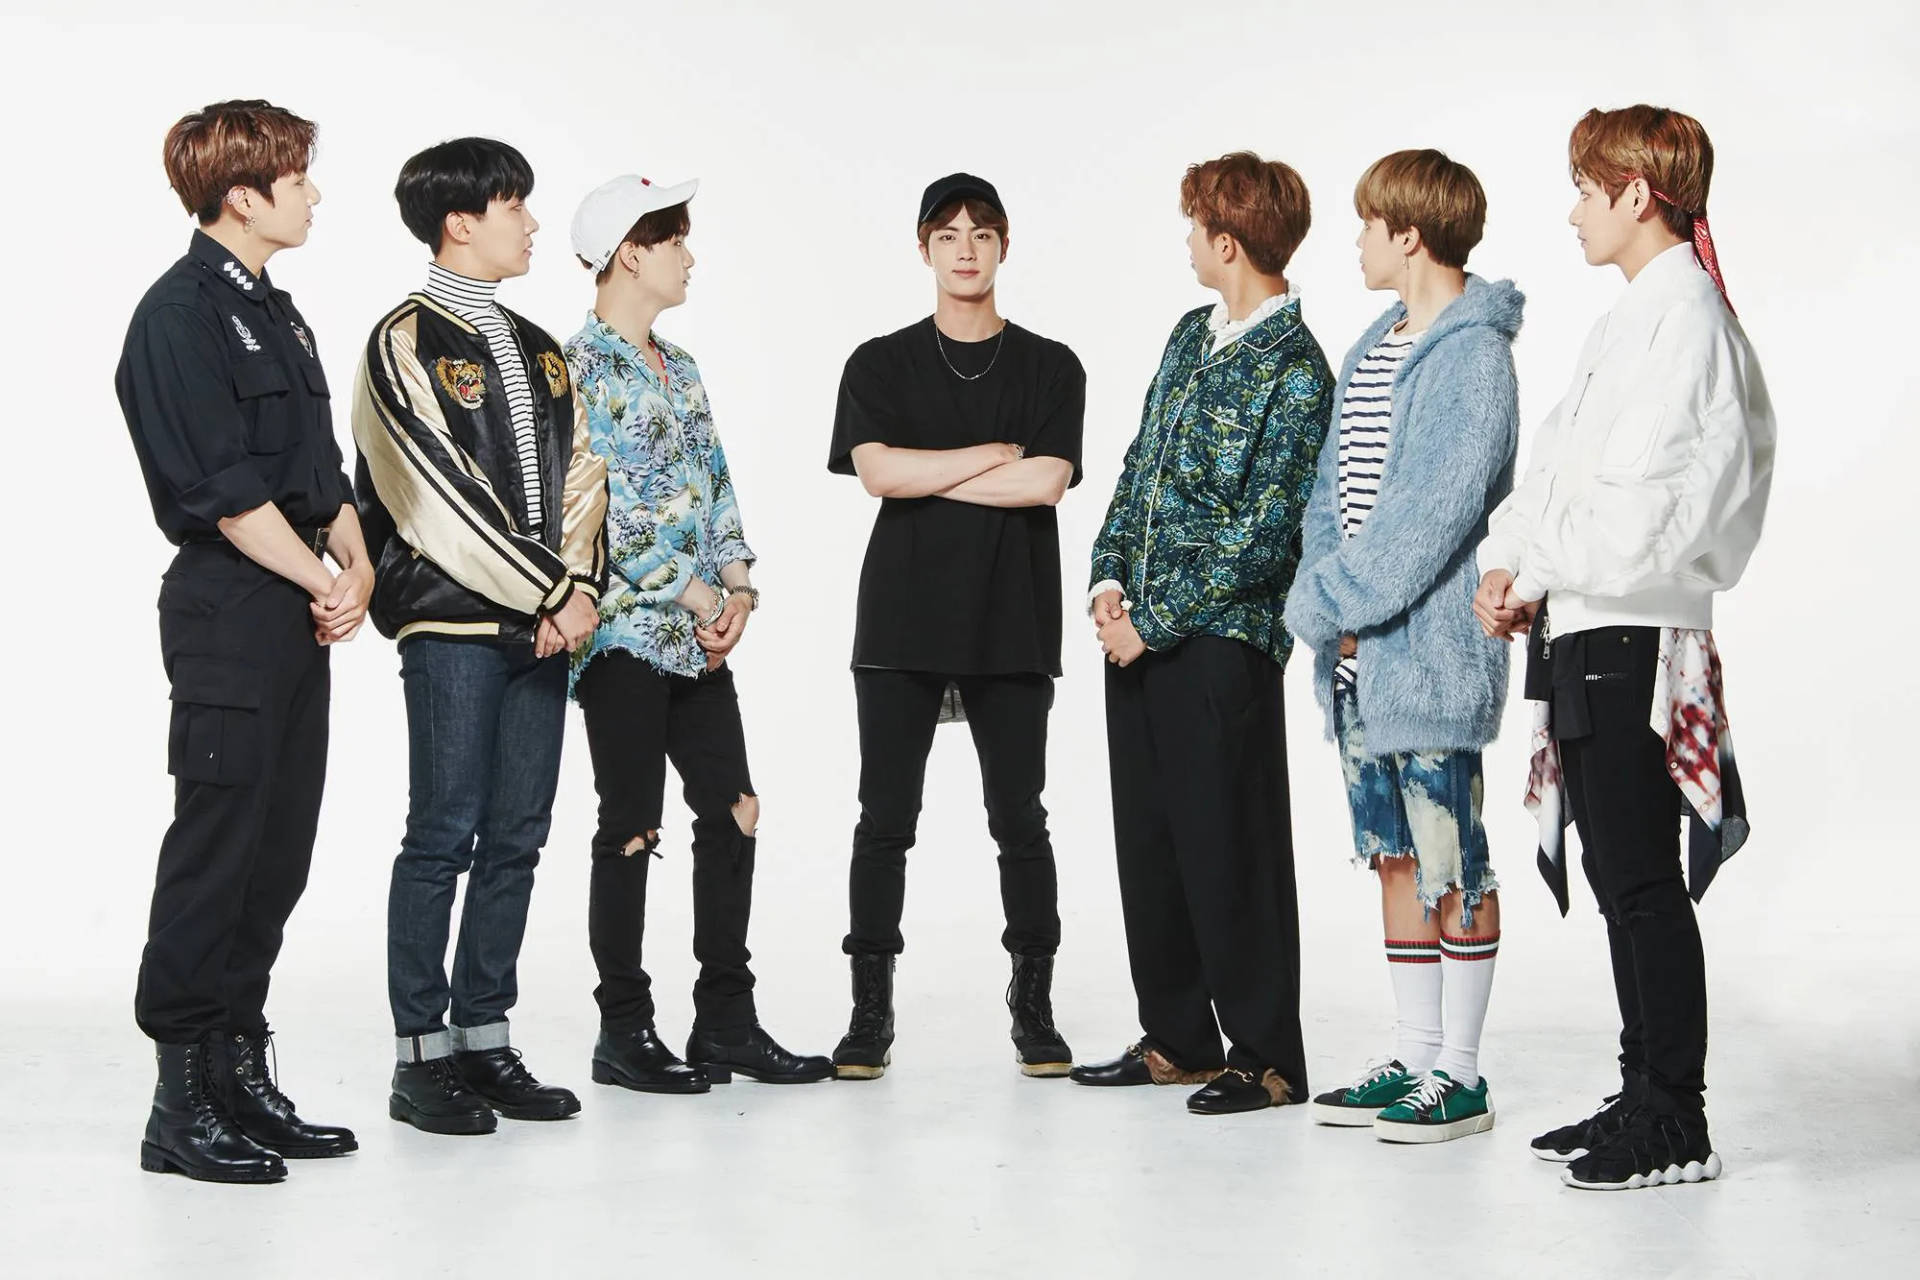 Cute Bts Group Formation With Jin In The Center